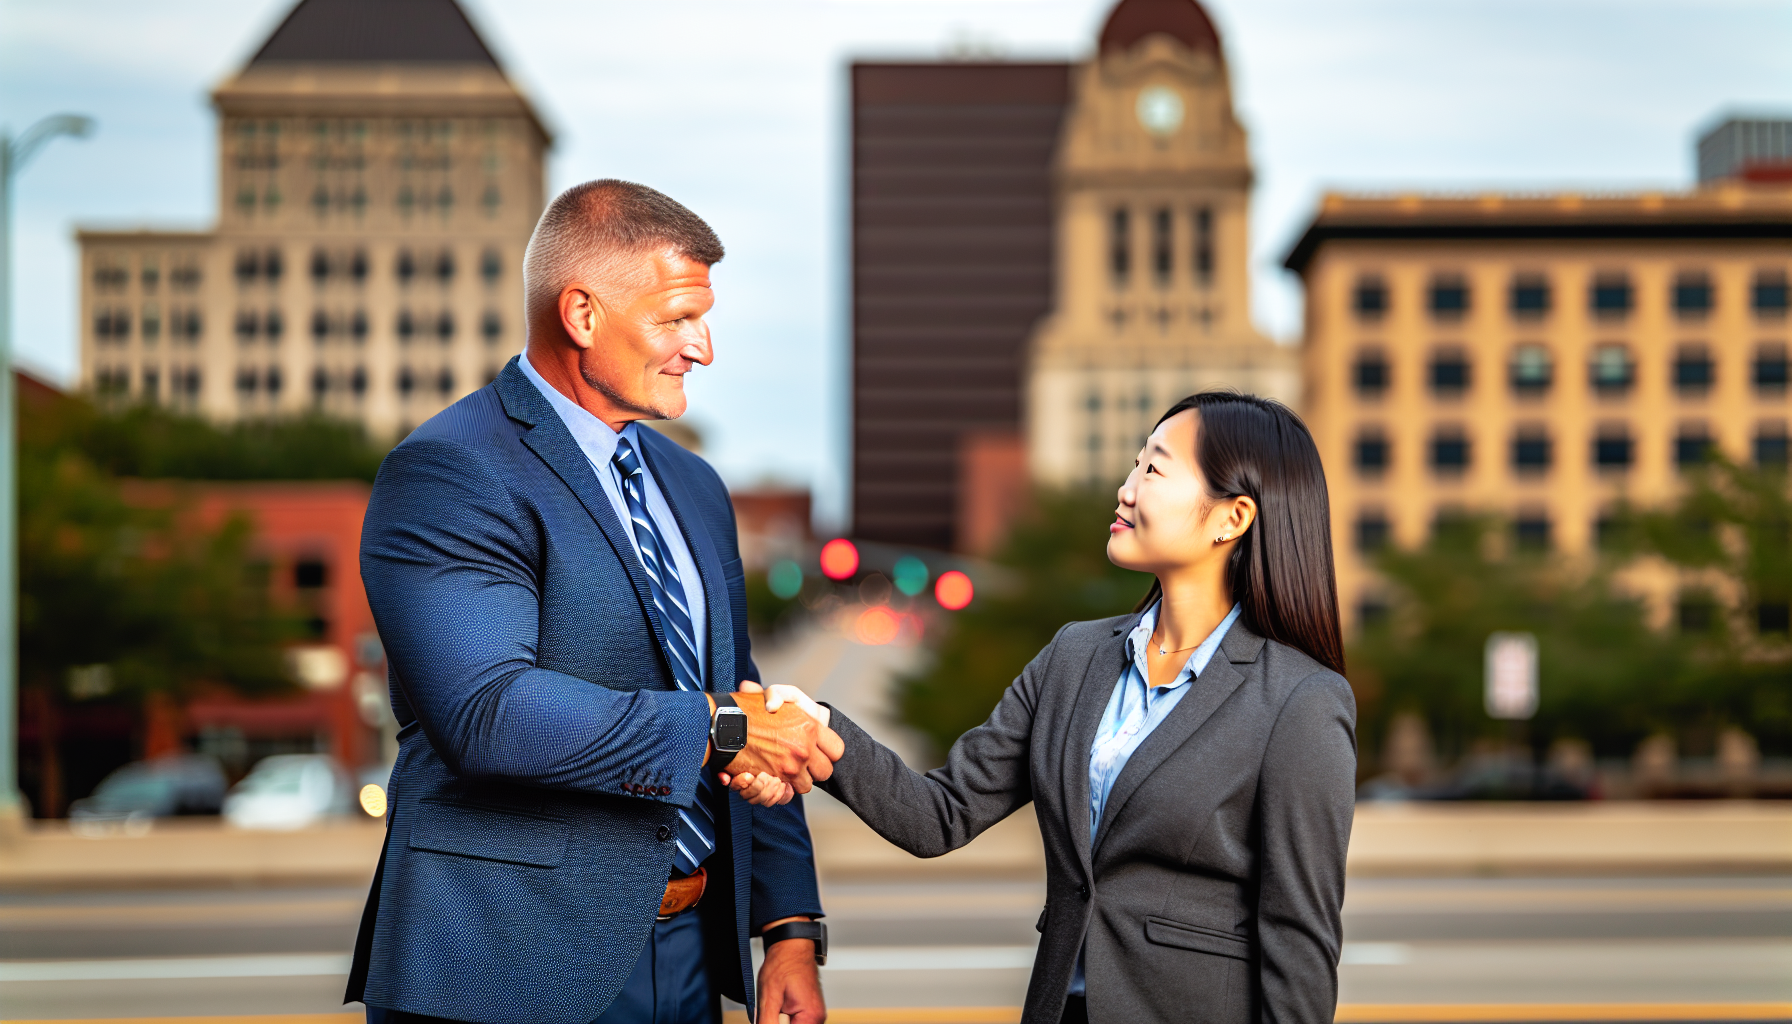 Two business professionals shaking hands in Lorain, Ohio